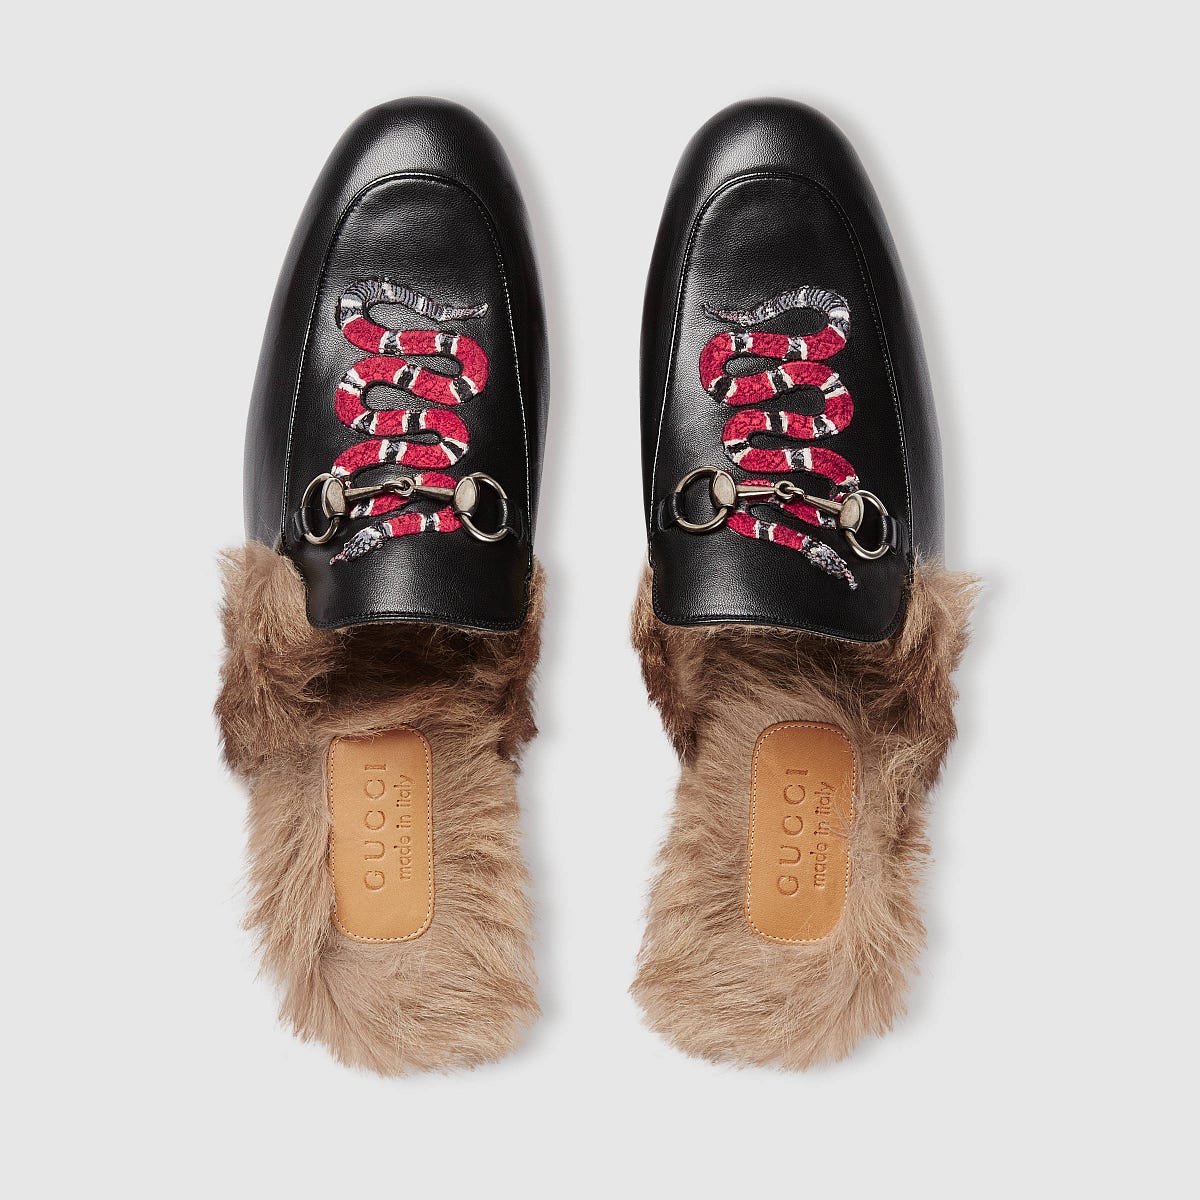 Review: Gucci Princetown Leather Slipper Snake) | by JB Sacman | Medium